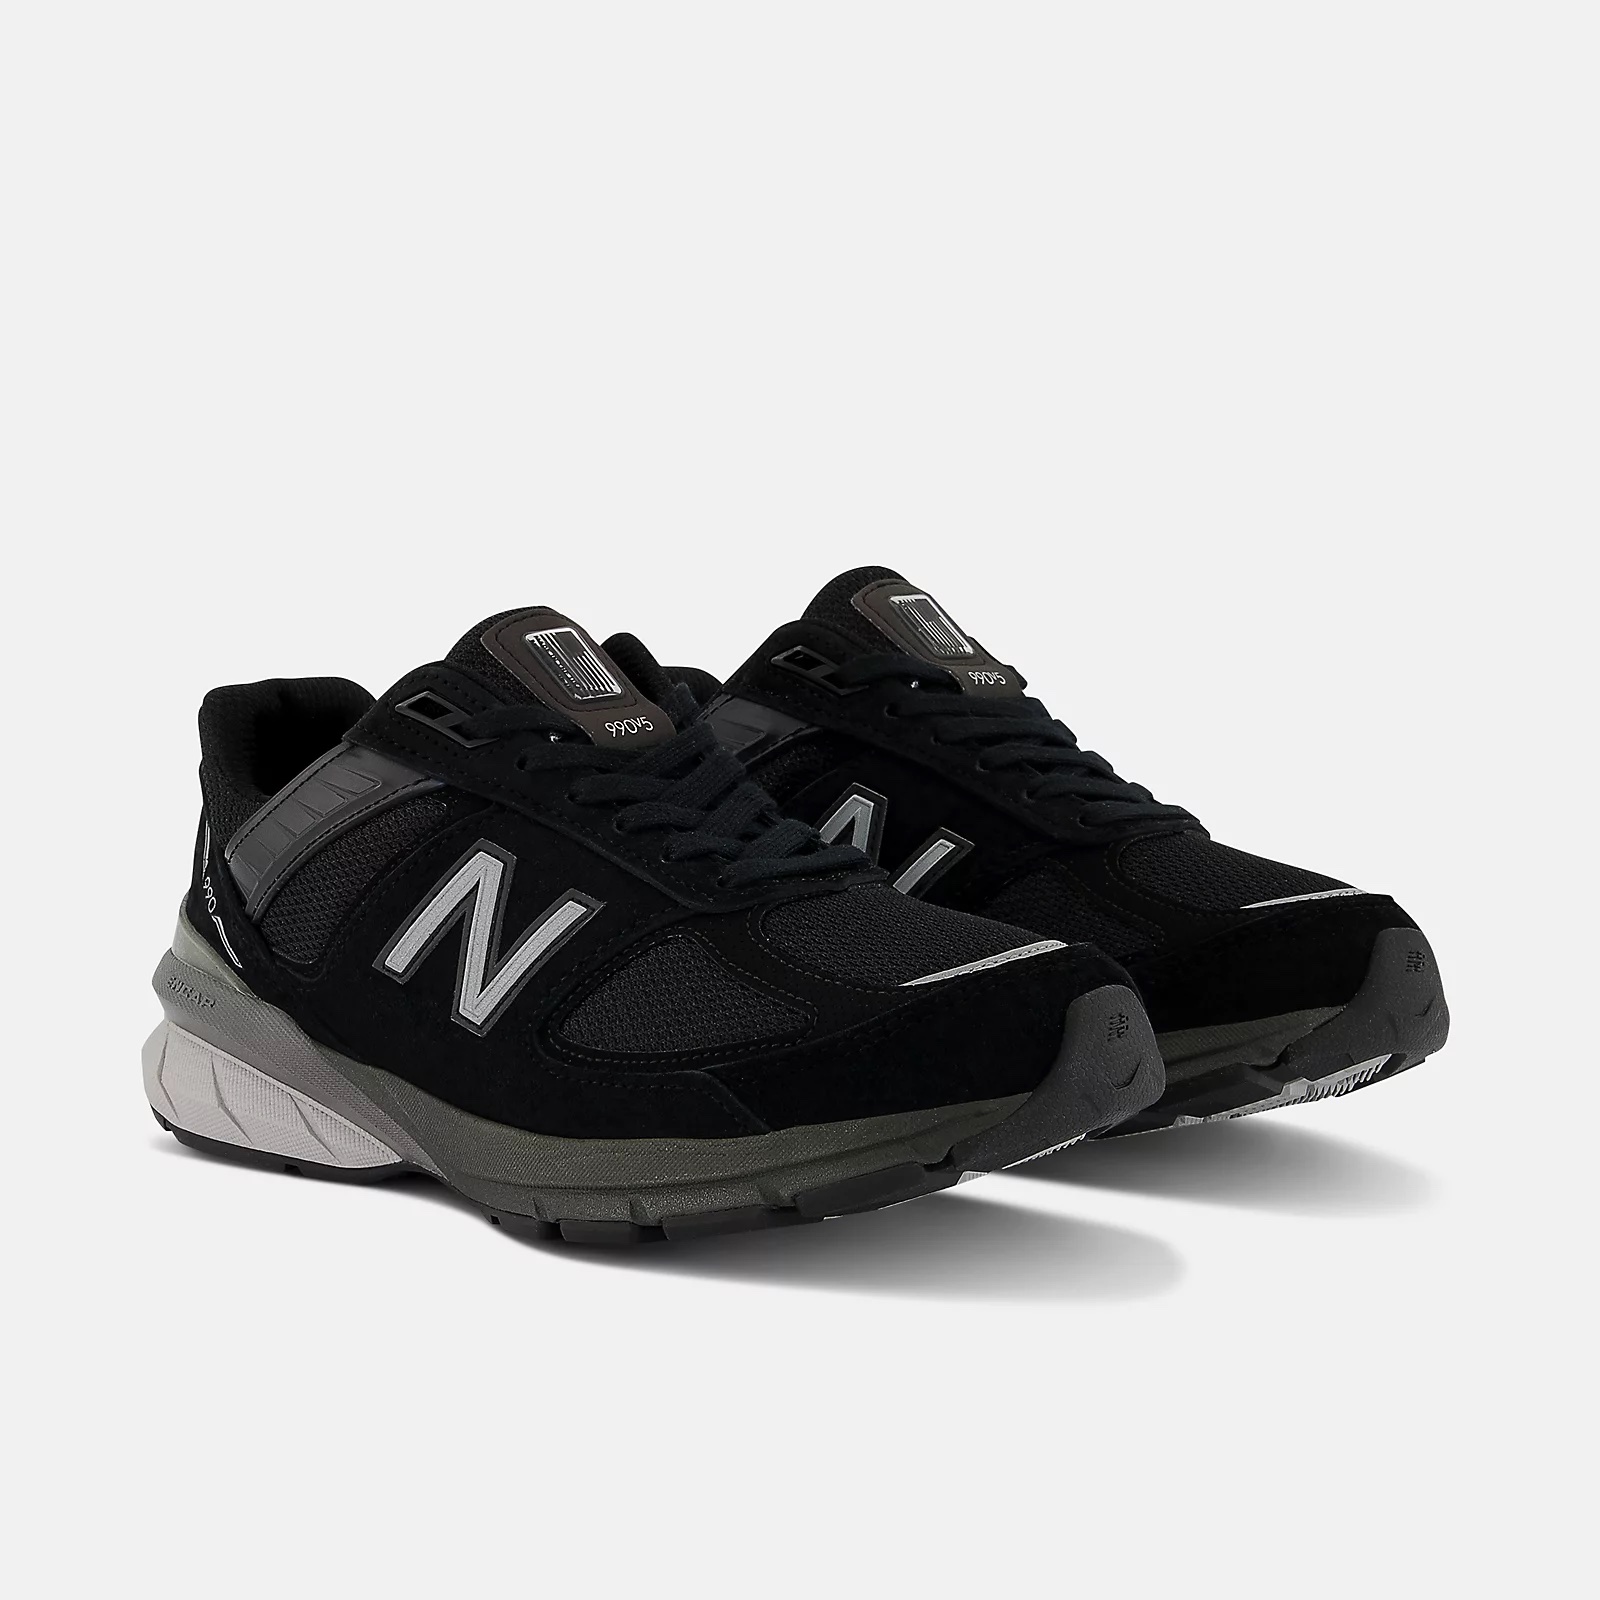 New Balance Shoes, According to Podiatrists in 2023 Well+Good